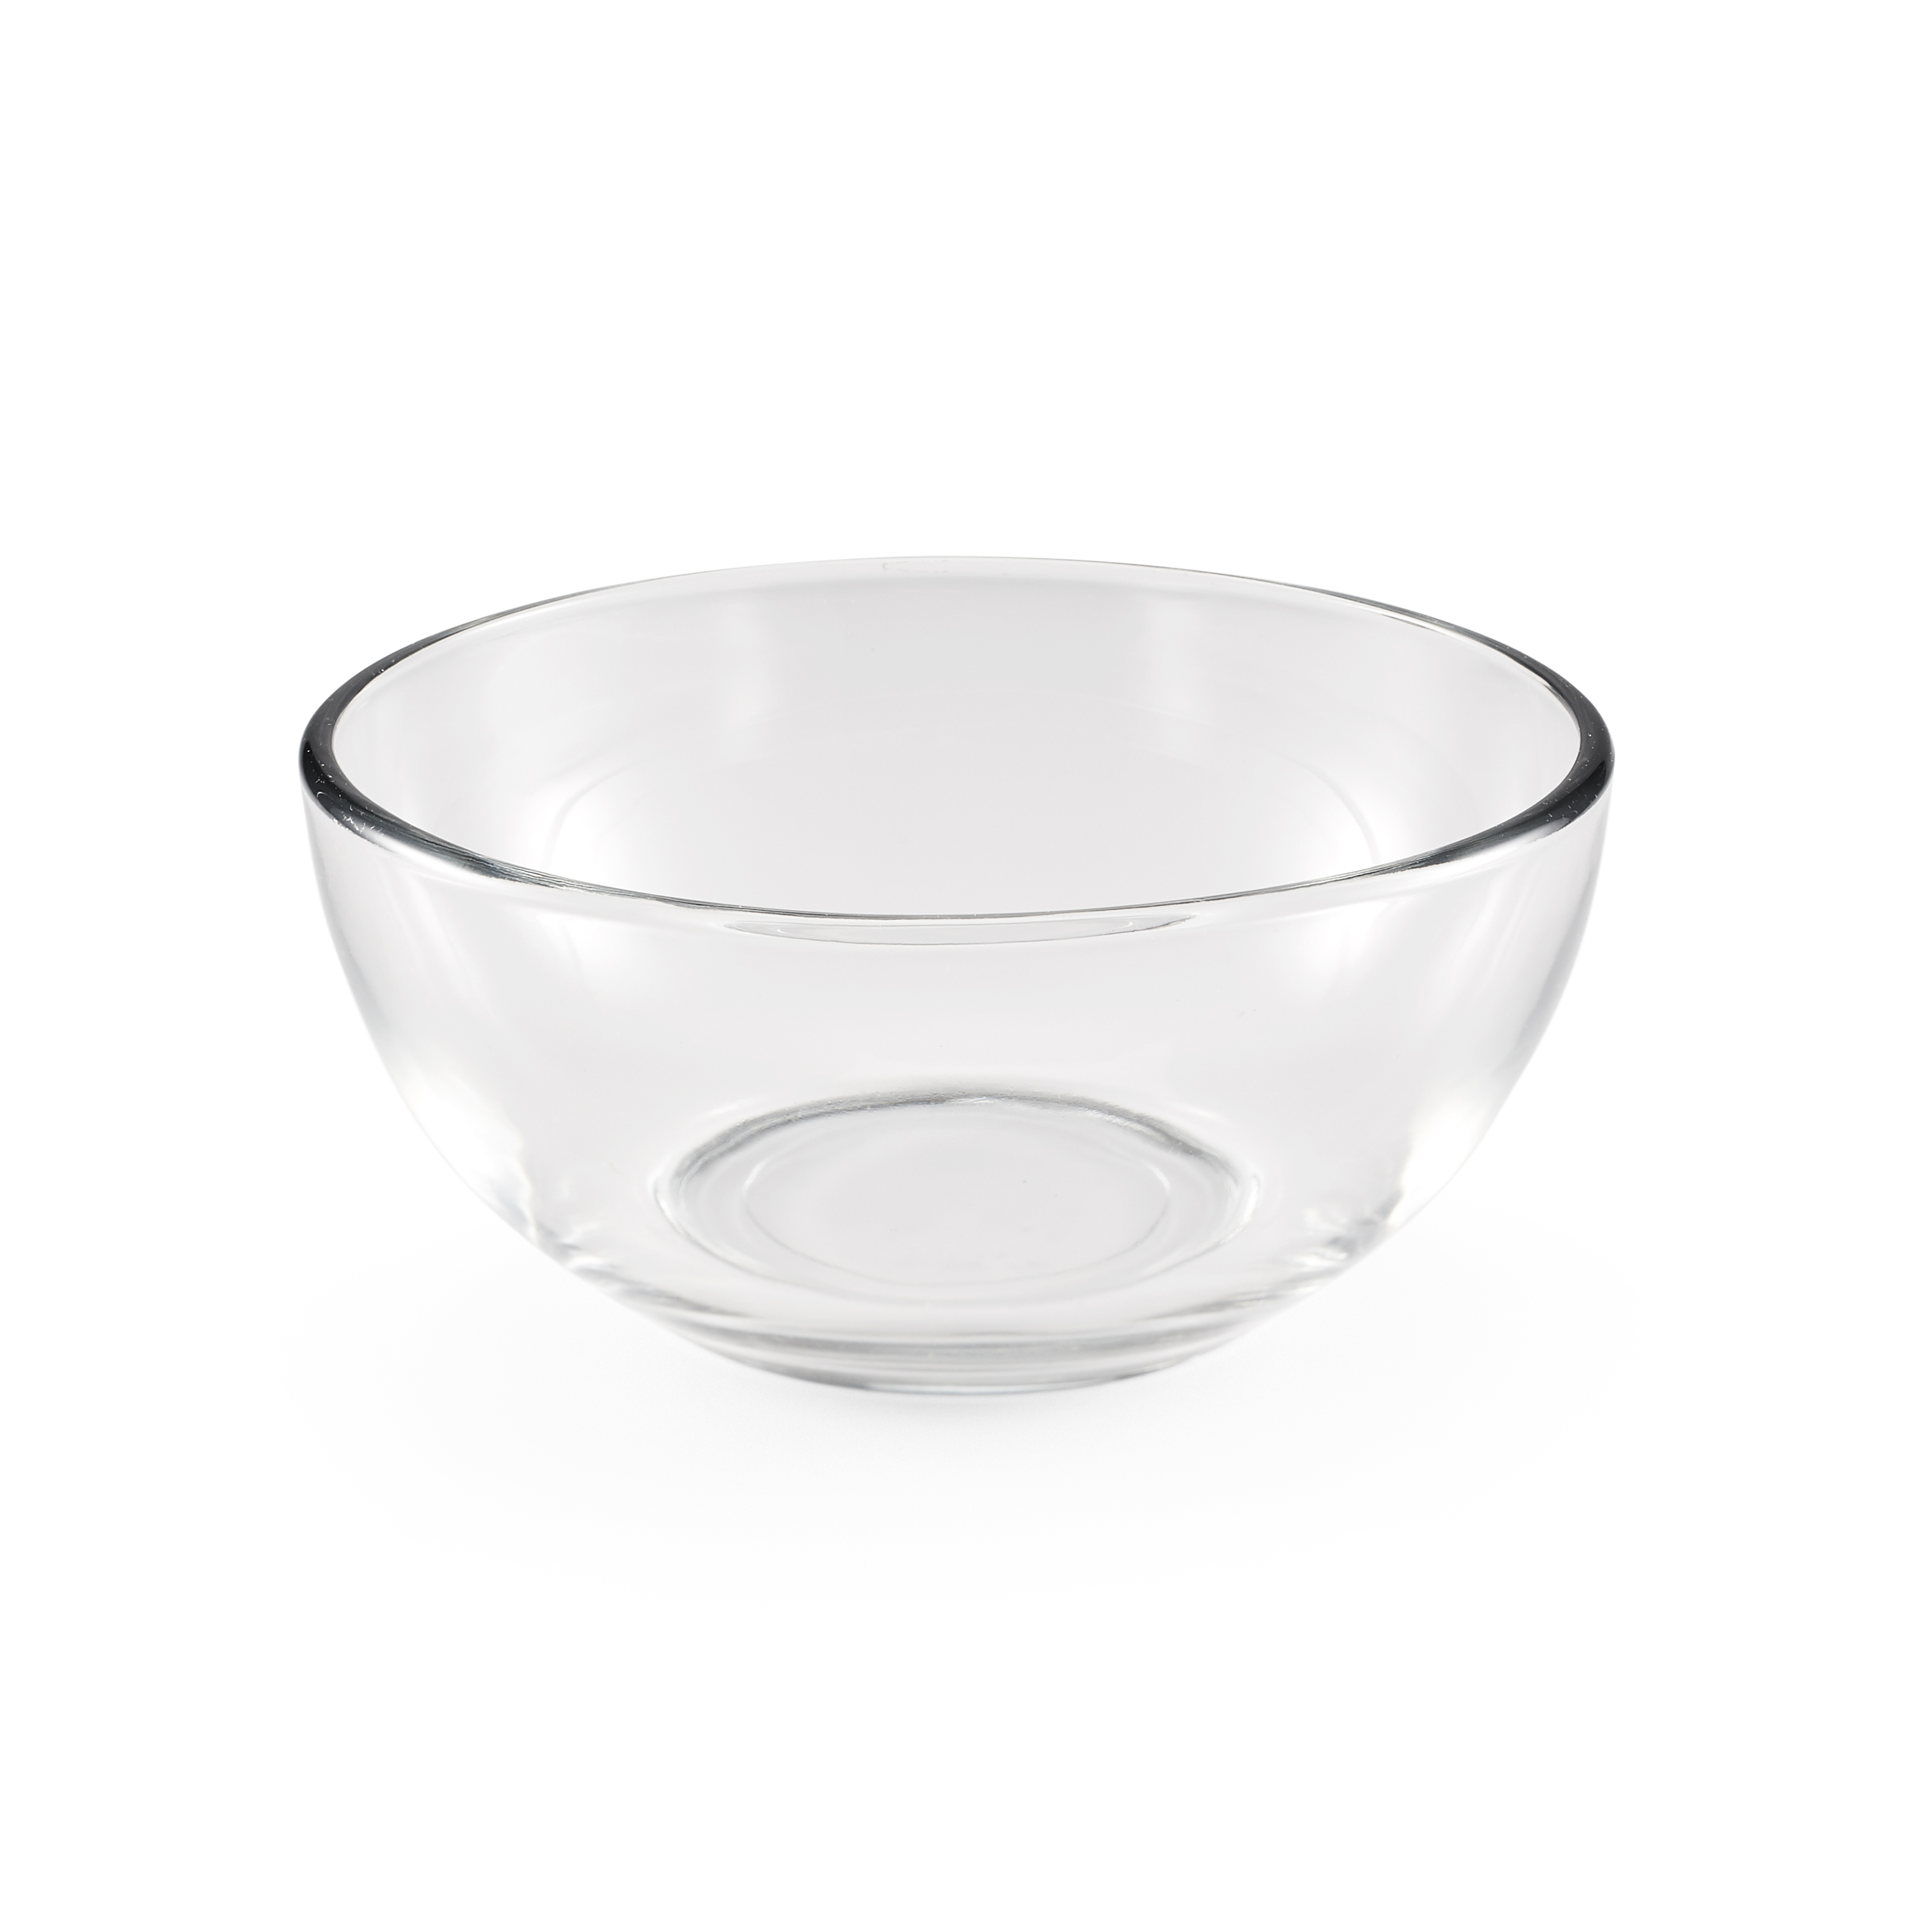 Mainstays Round Glass Bowls Catering Pack, Set of 12 - image 3 of 10